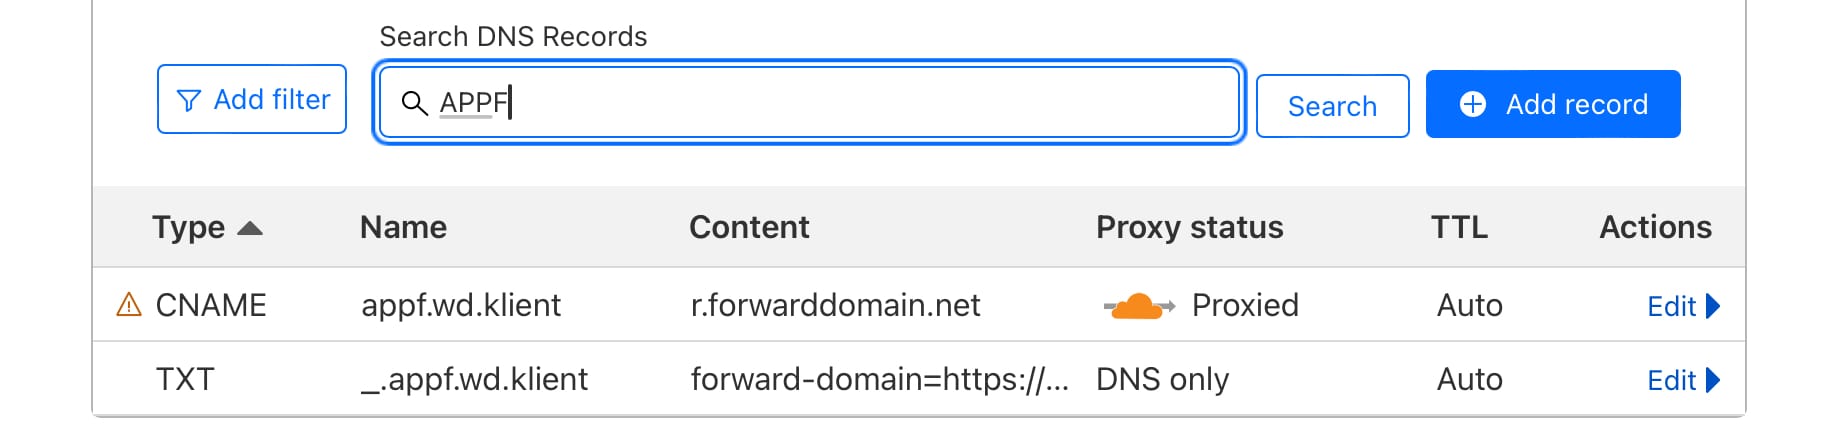 Rekordy DNS CloudFlare 